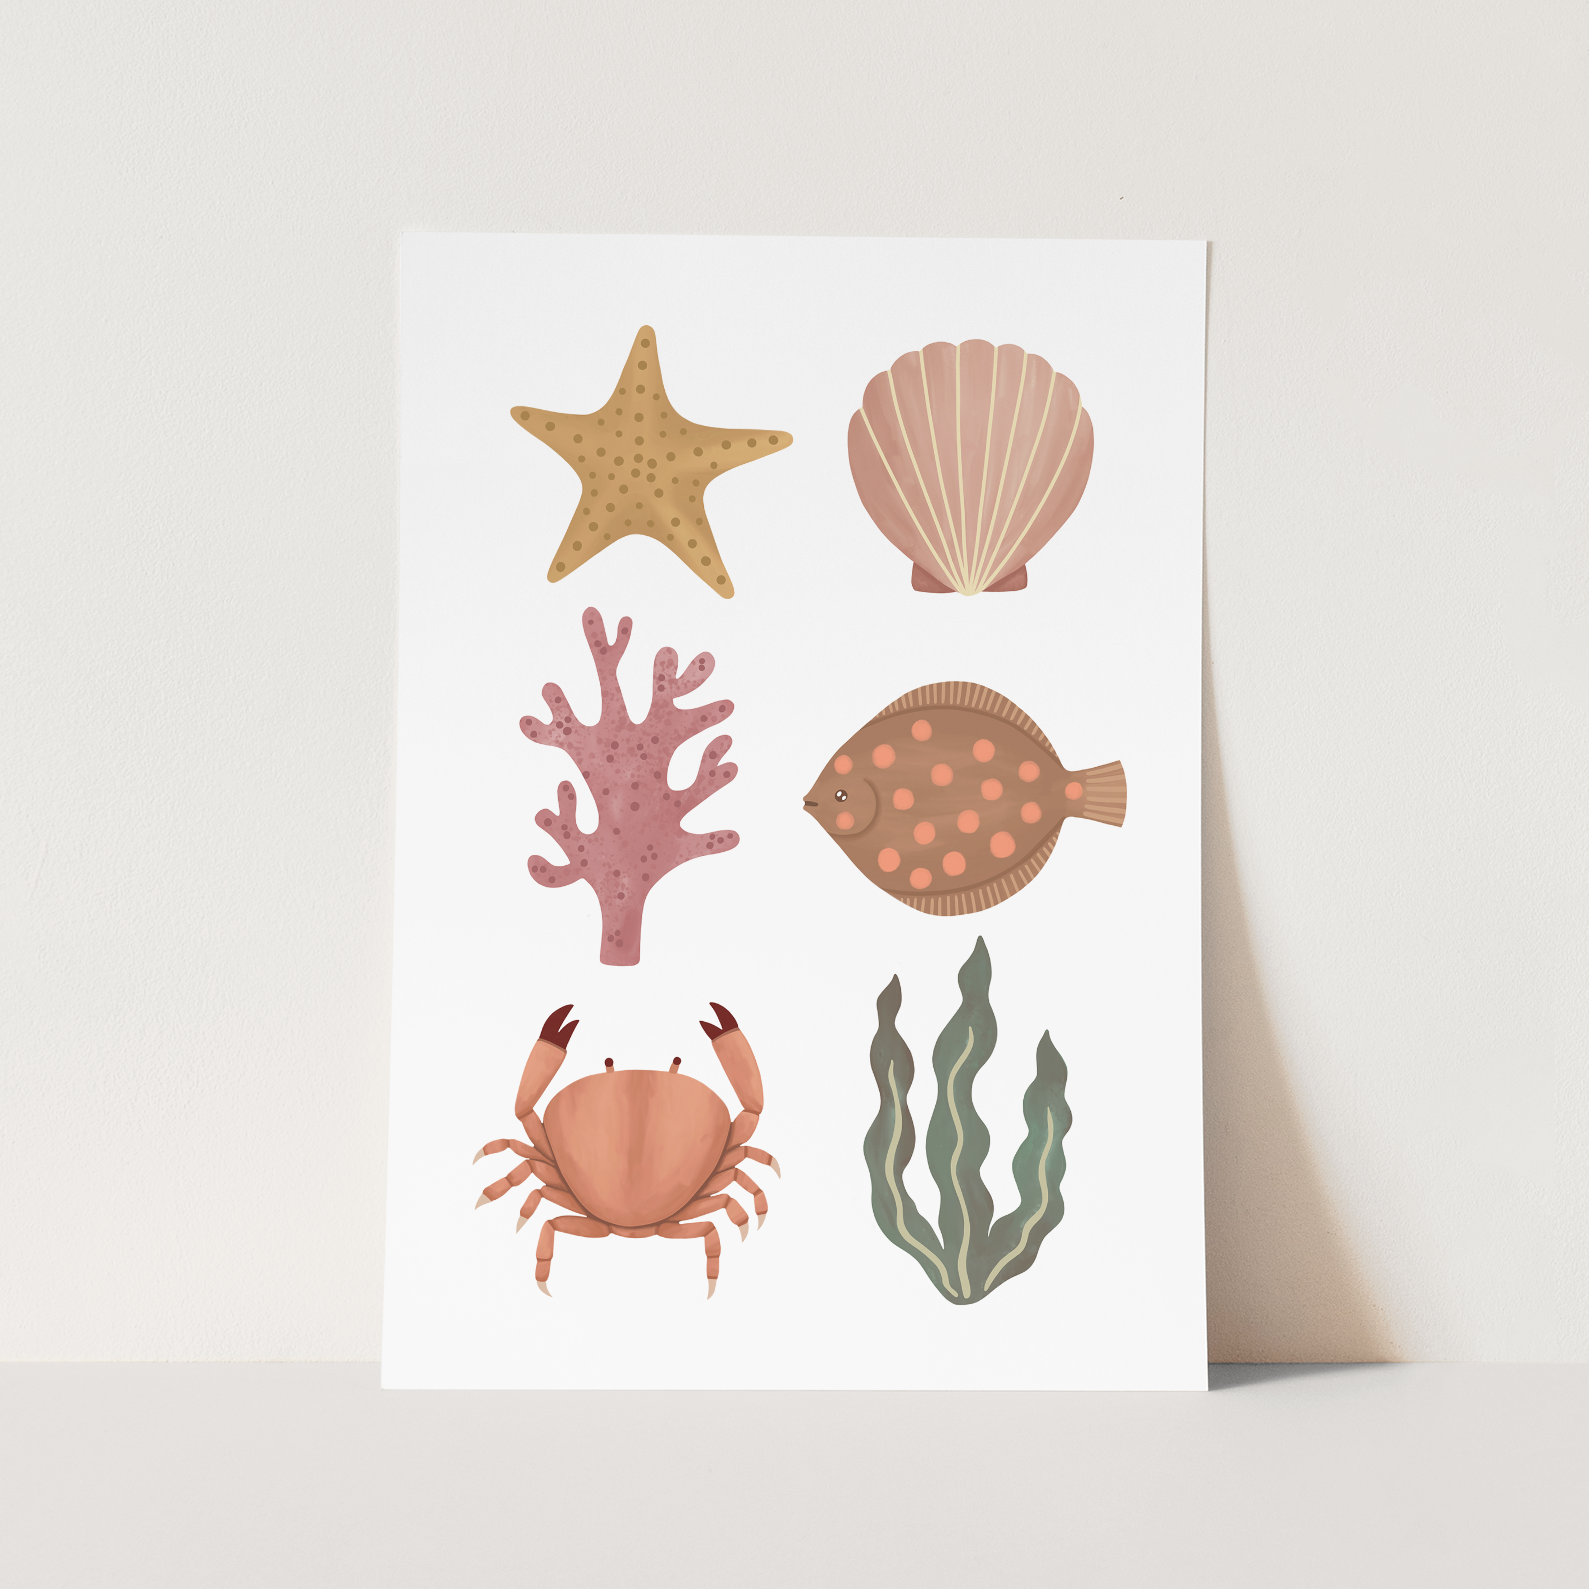 Under The Sea Art Print by Kid of the Village (6 Sizes Available)